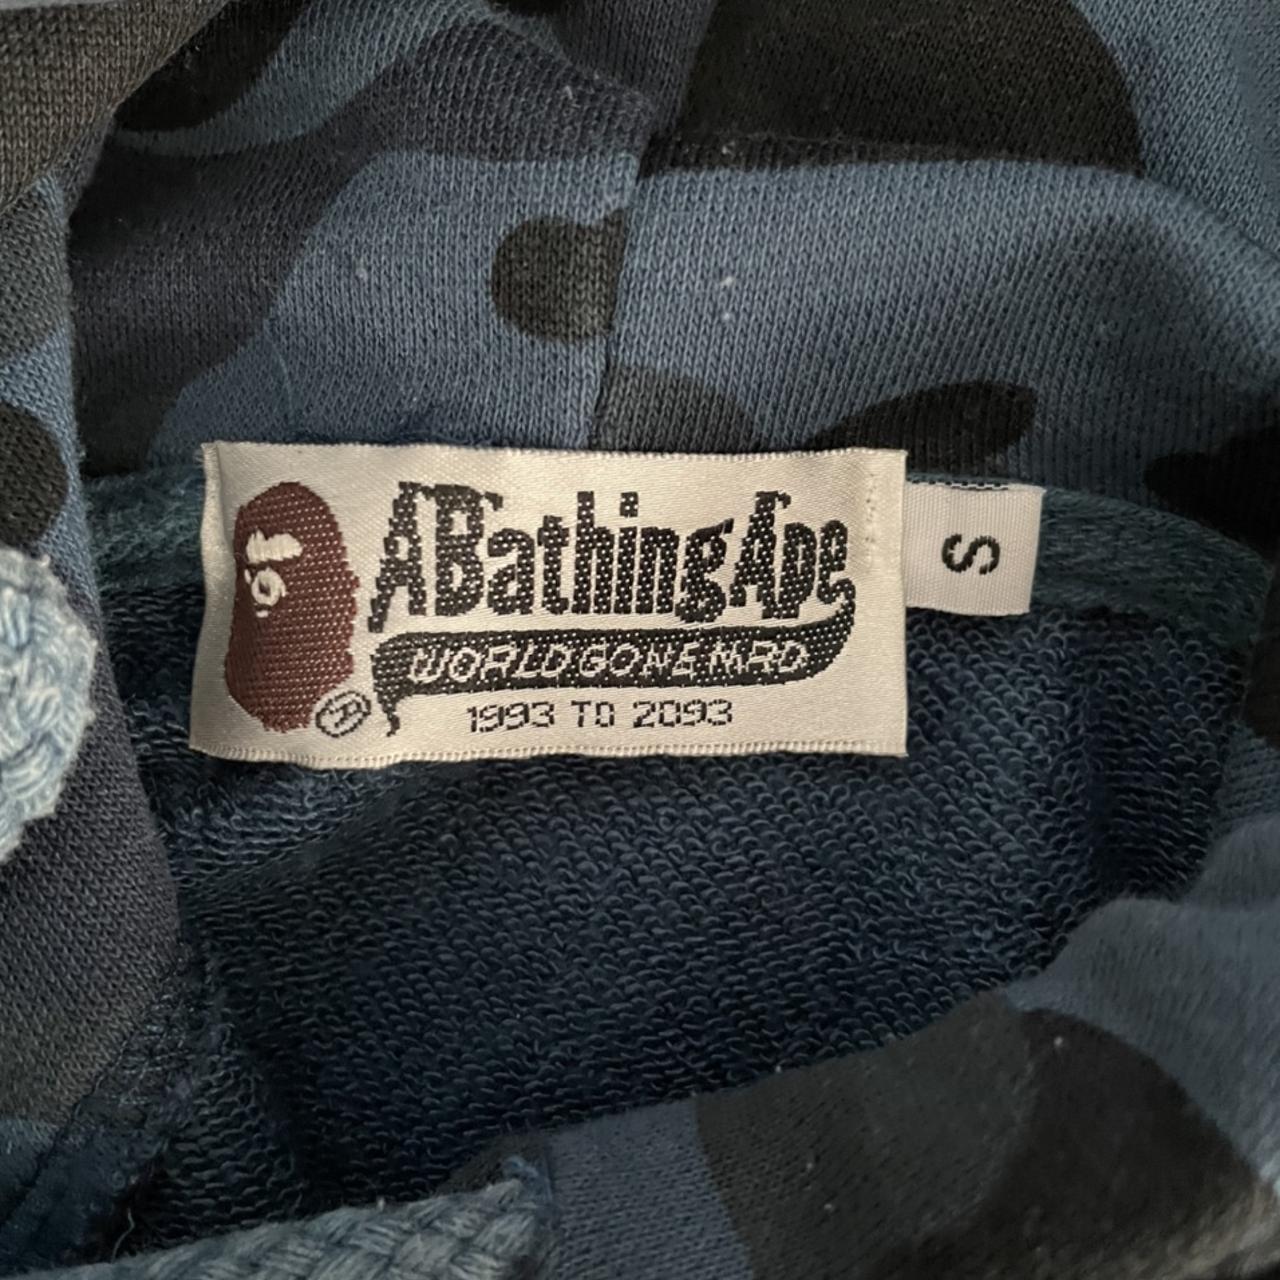 Authentic Bape hoodie (tag shown), size small,... - Depop